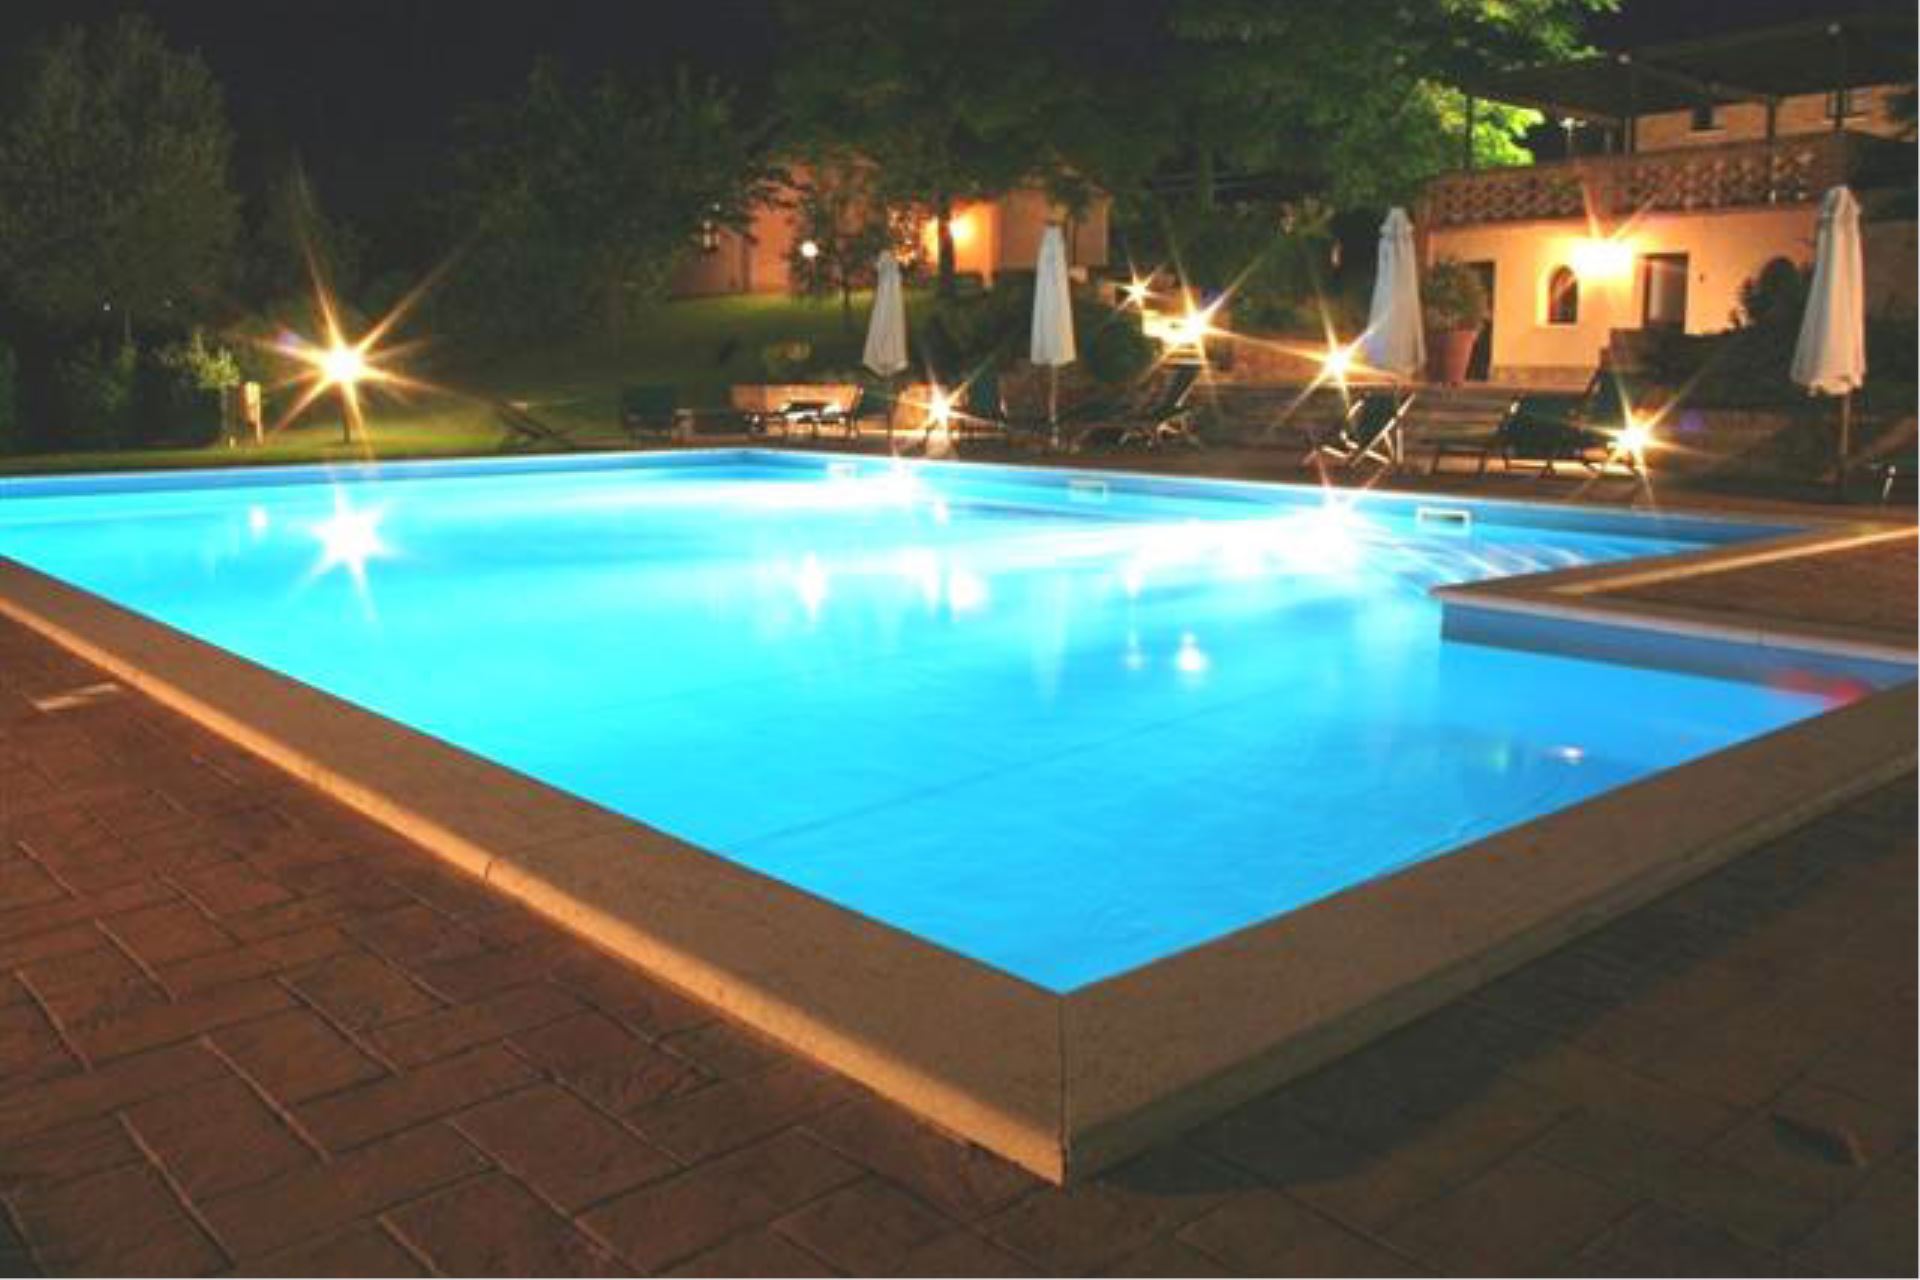 APARTMENTS WITH POOL CIPRESSO MONTEPULCIANO TOSCANA